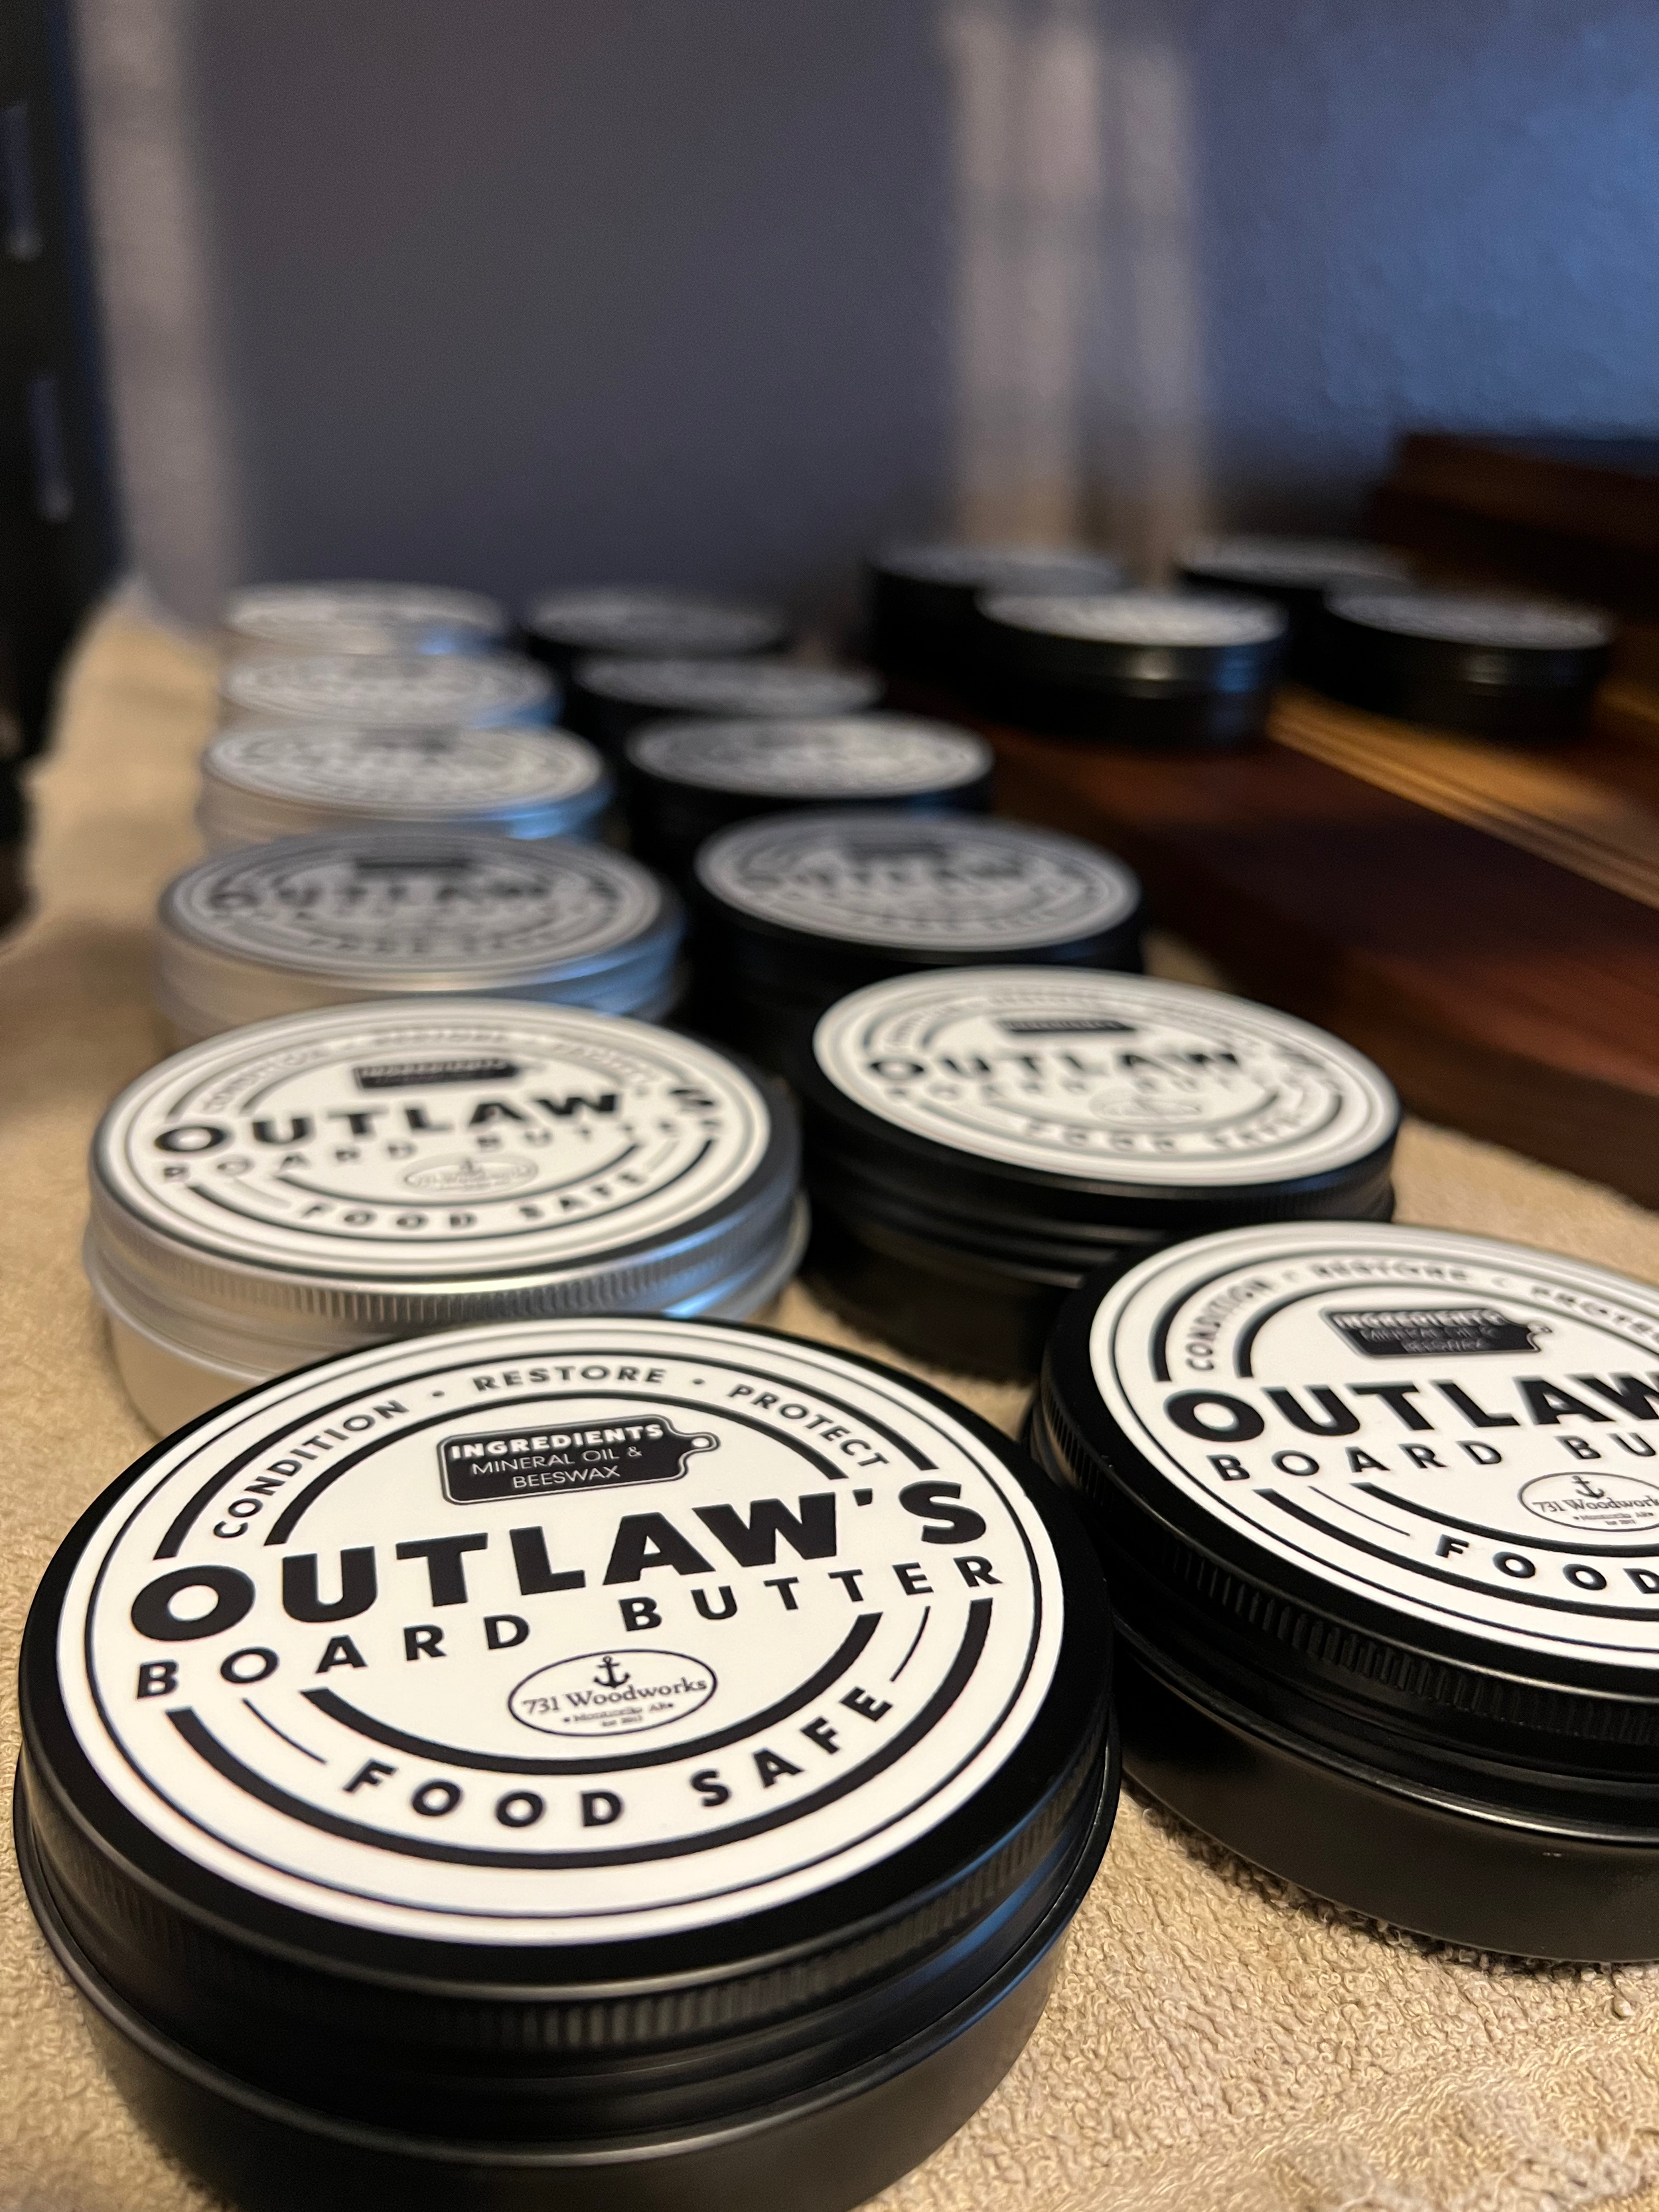 Outlaw's Board Butter — 731 Woodworks